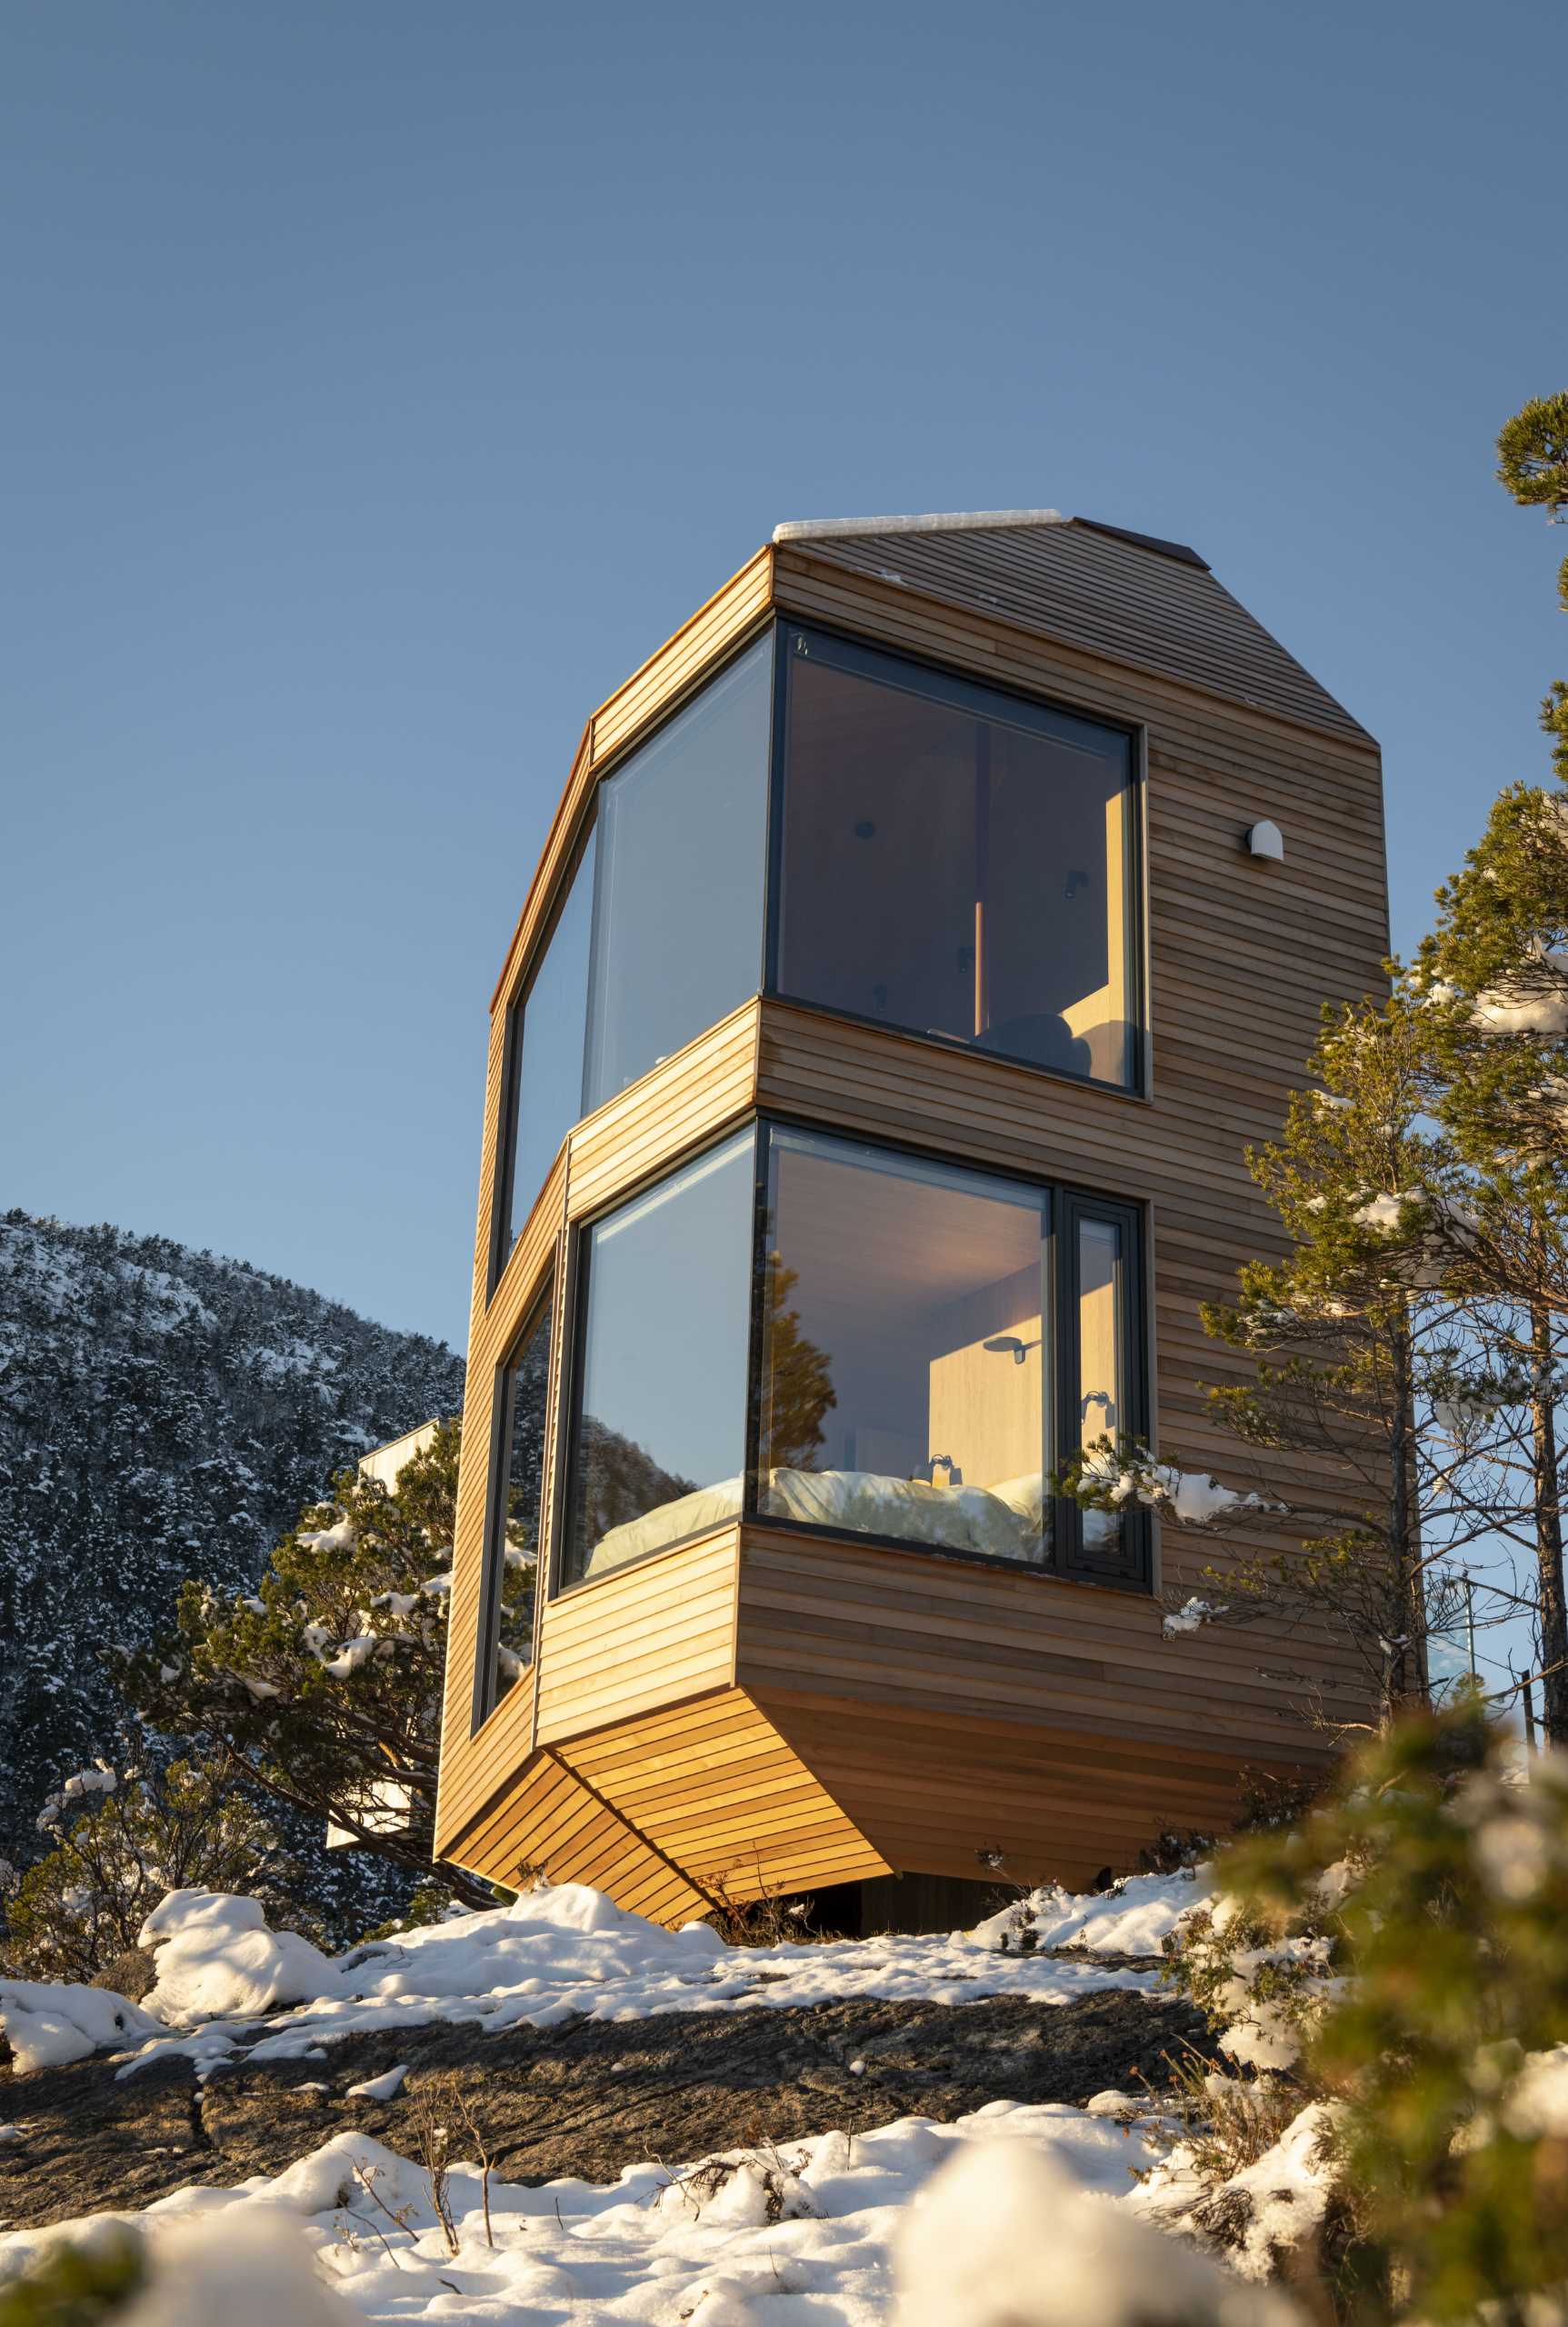 A modern cabin that's built to blend in with the landscape with a minimal footprint on the surrounding nature.